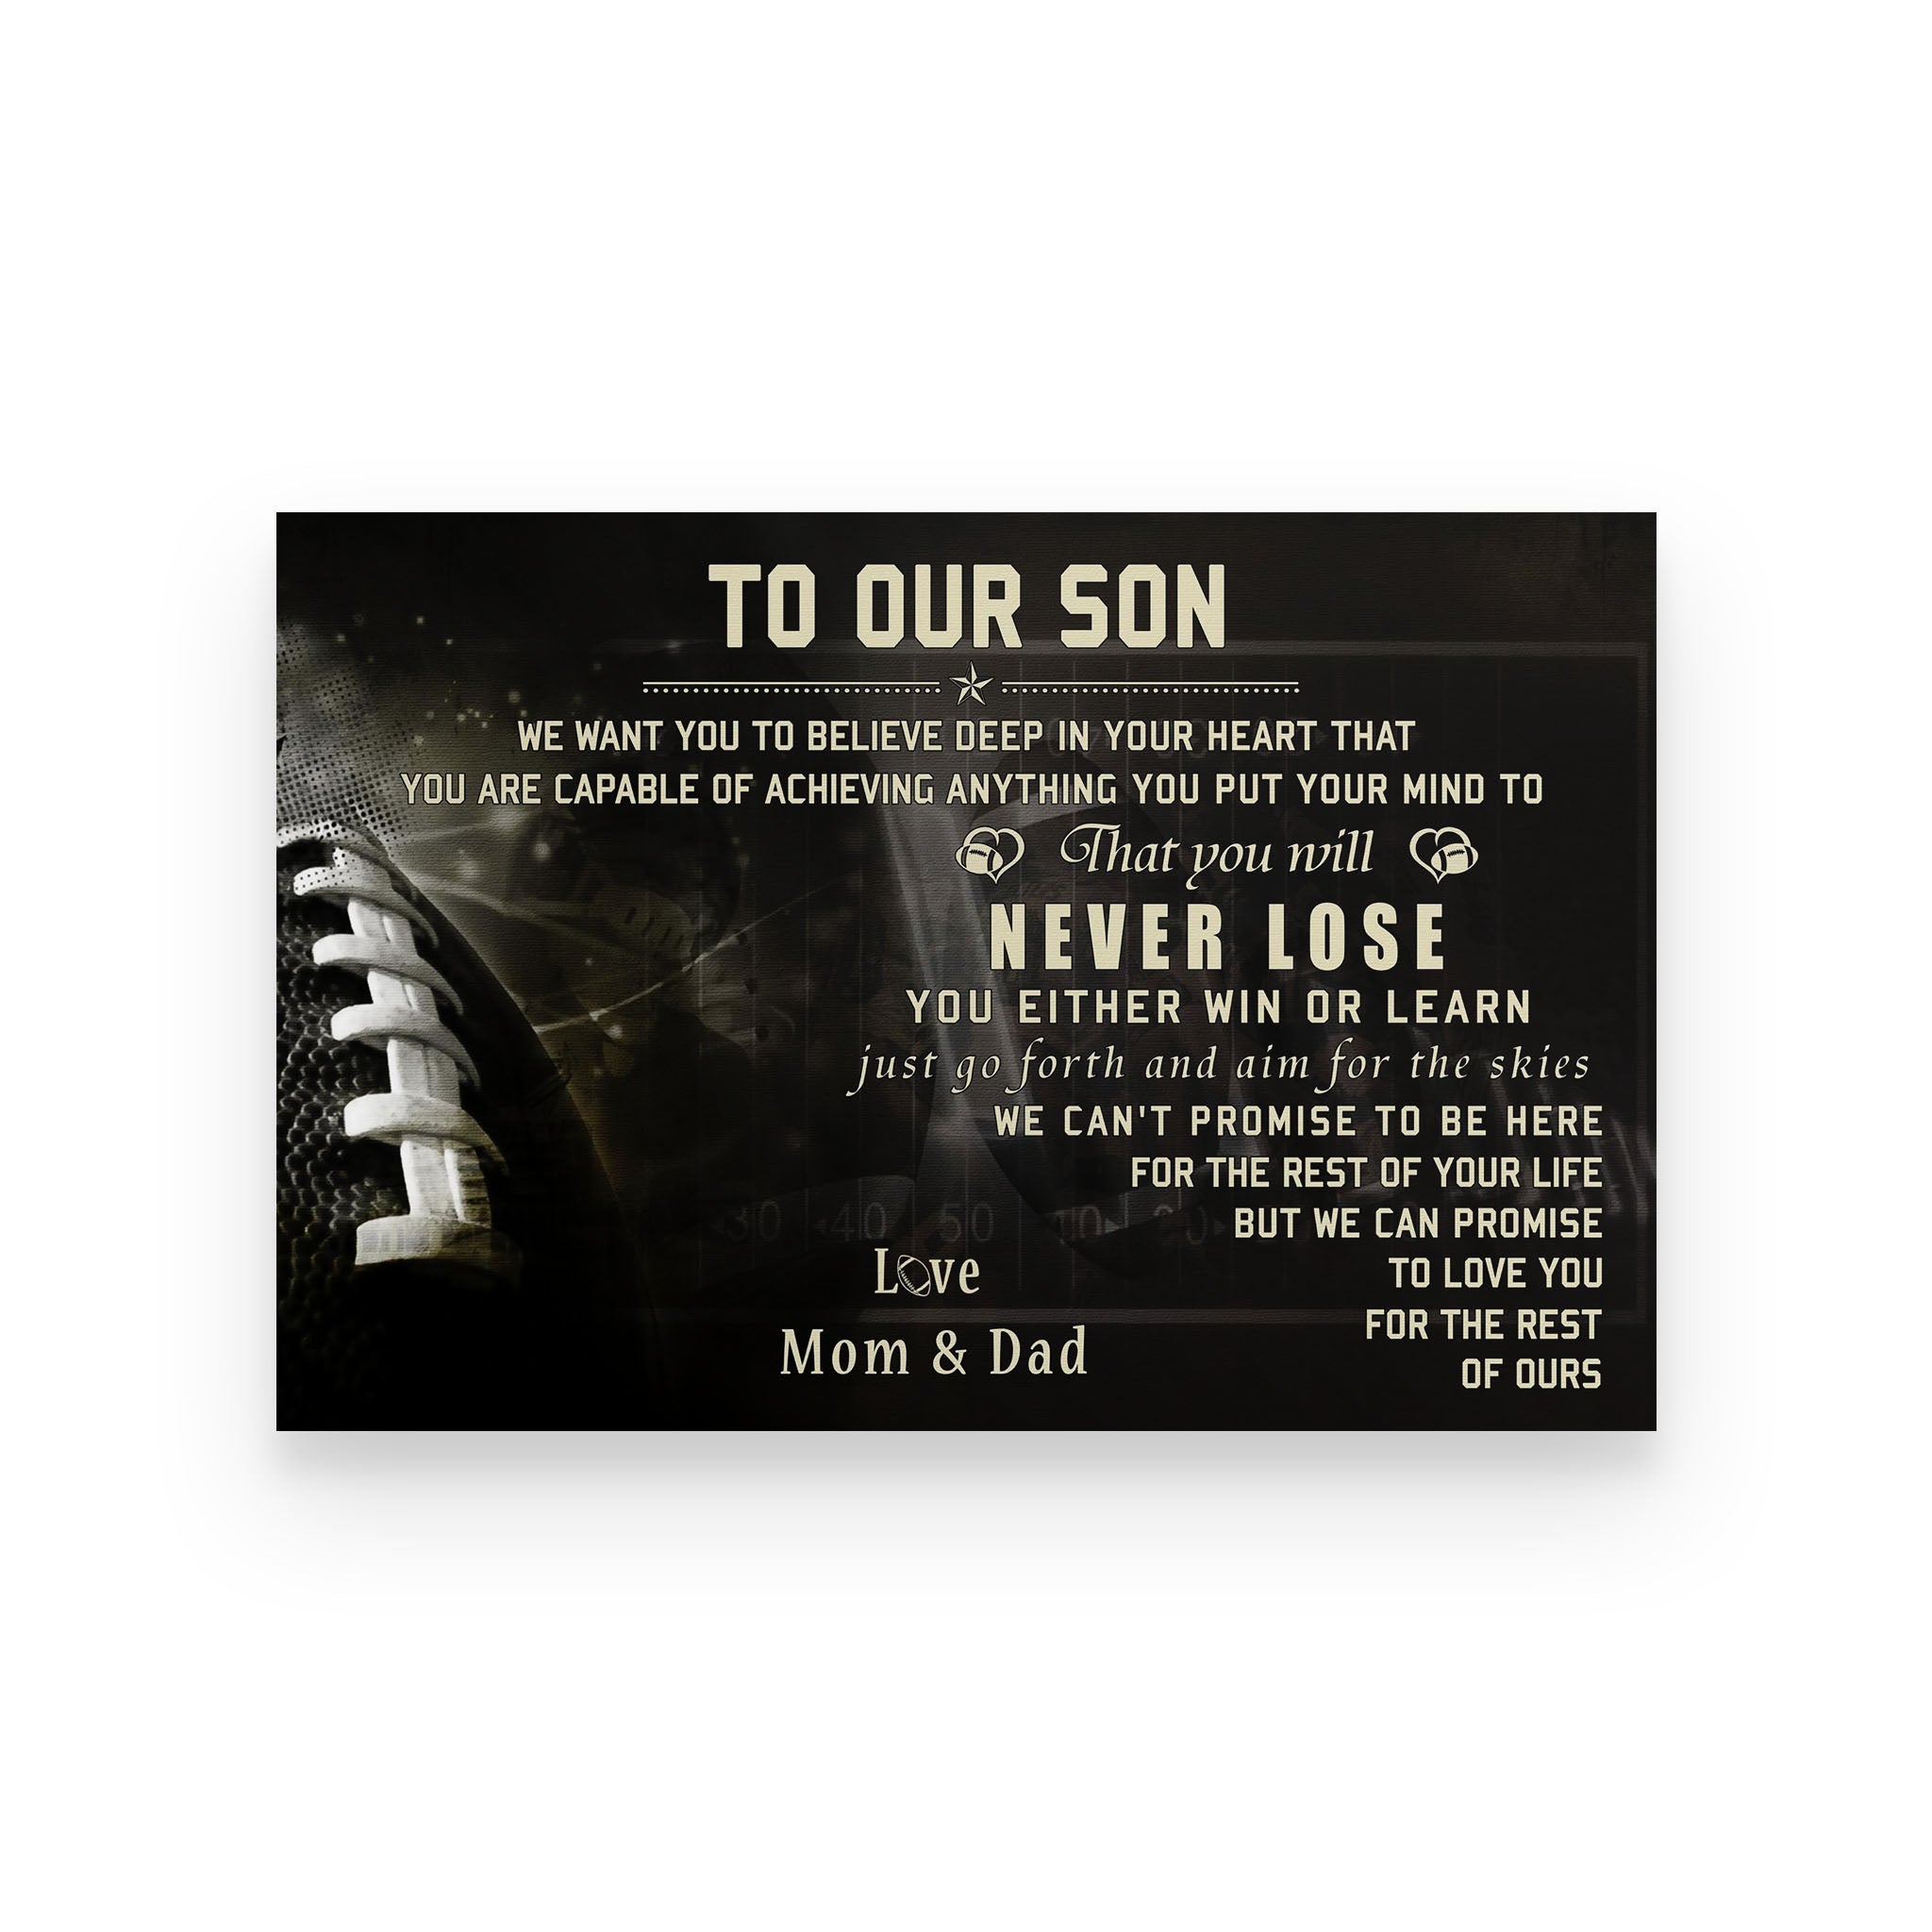 American football poster mom and dad to son we want you to believe deep in your heart